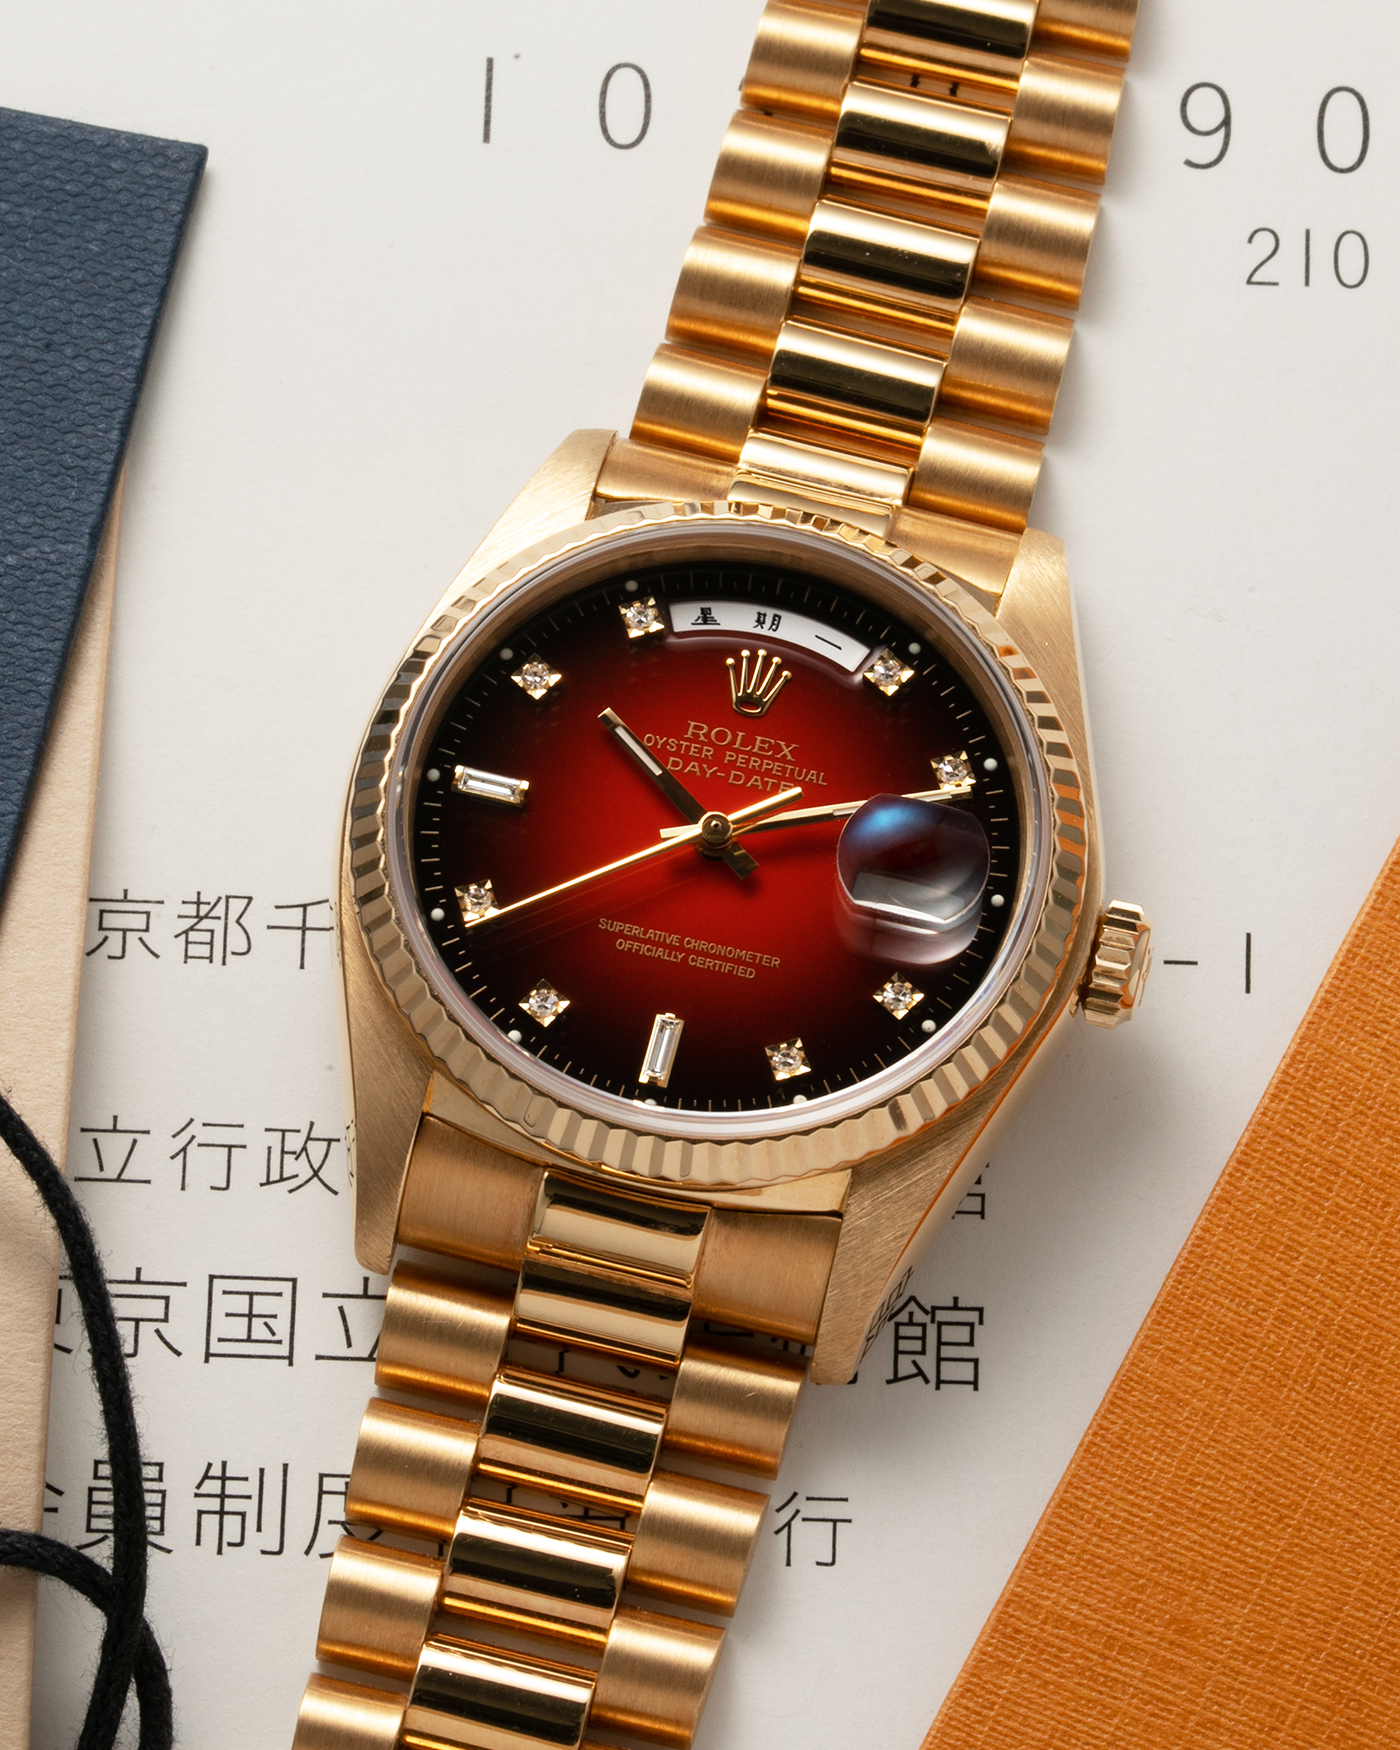 Brand: Rolex Year: 1979 Serial Number: 626XXXX Model: Day Date, Red Vignette Lacquer Dial, Chinese Day and Date Discs Reference Number: 18038 Material: 18-carat Yellow Gold Movement: Cal. 3055, Self-Winding Case Diameter: 36mm Lug Width: 20mm Bracelet: Rolex 8385 18-carat Yellow Gold Presidential Bracelet